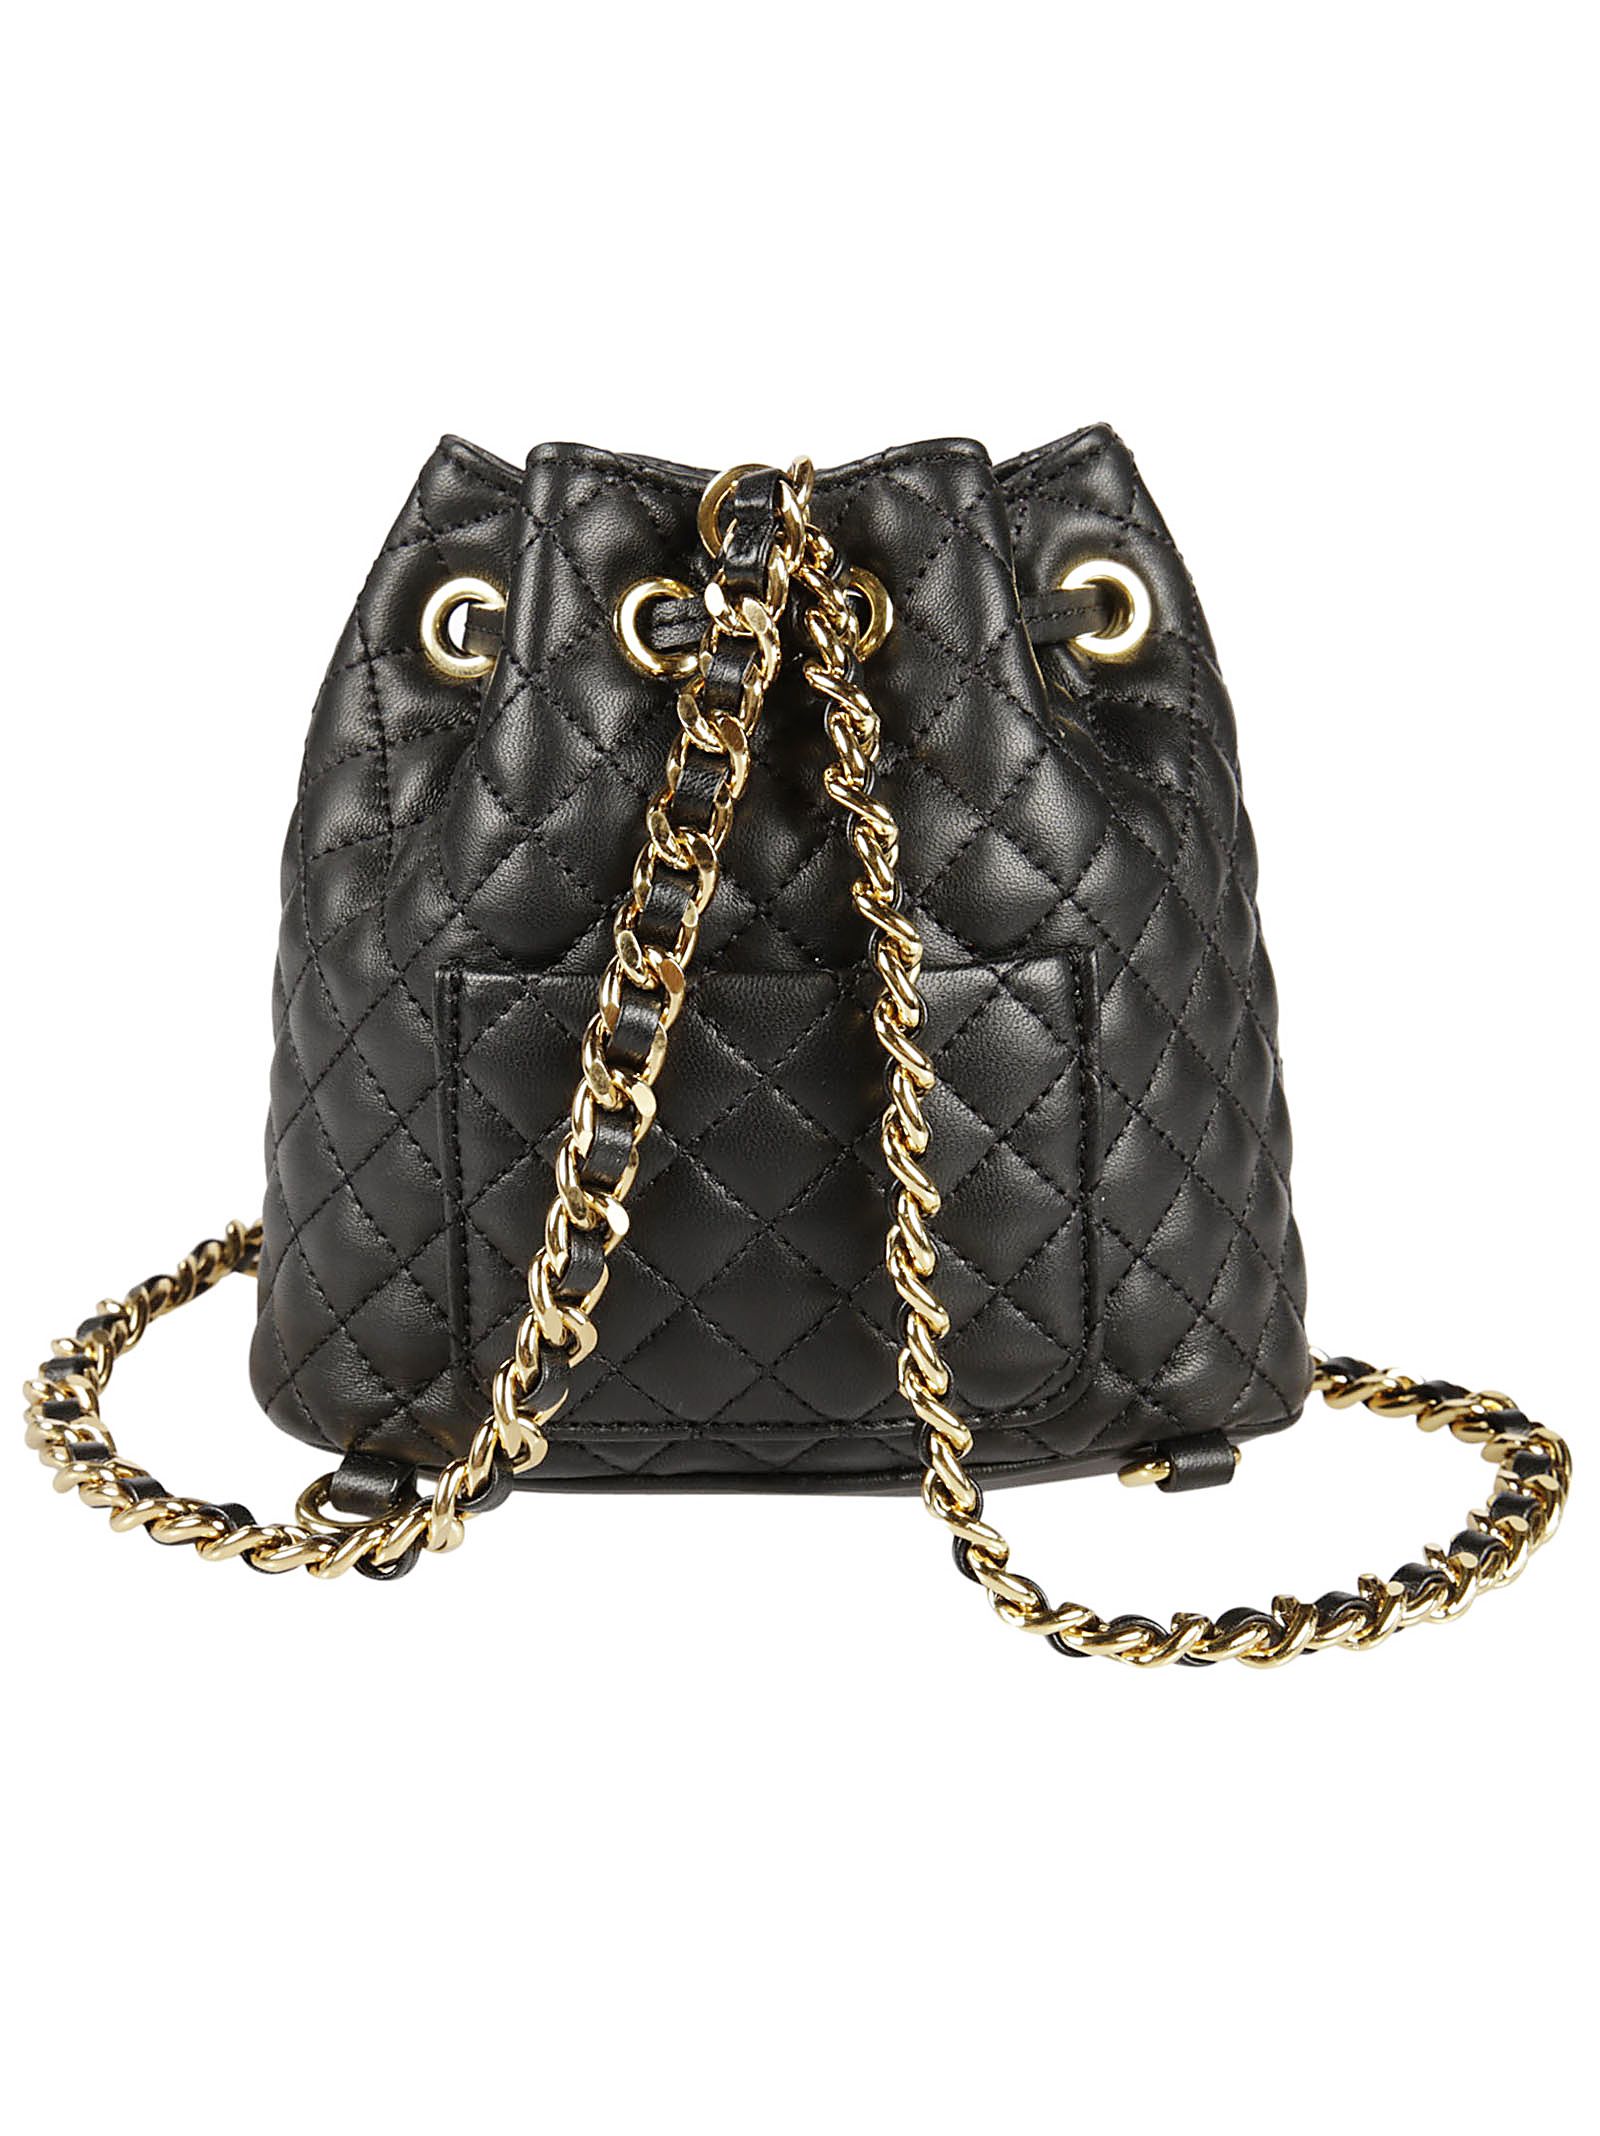 Moschino - Moschino Quilted Bucket Bag - Black, Women's Shoulder Bags ...